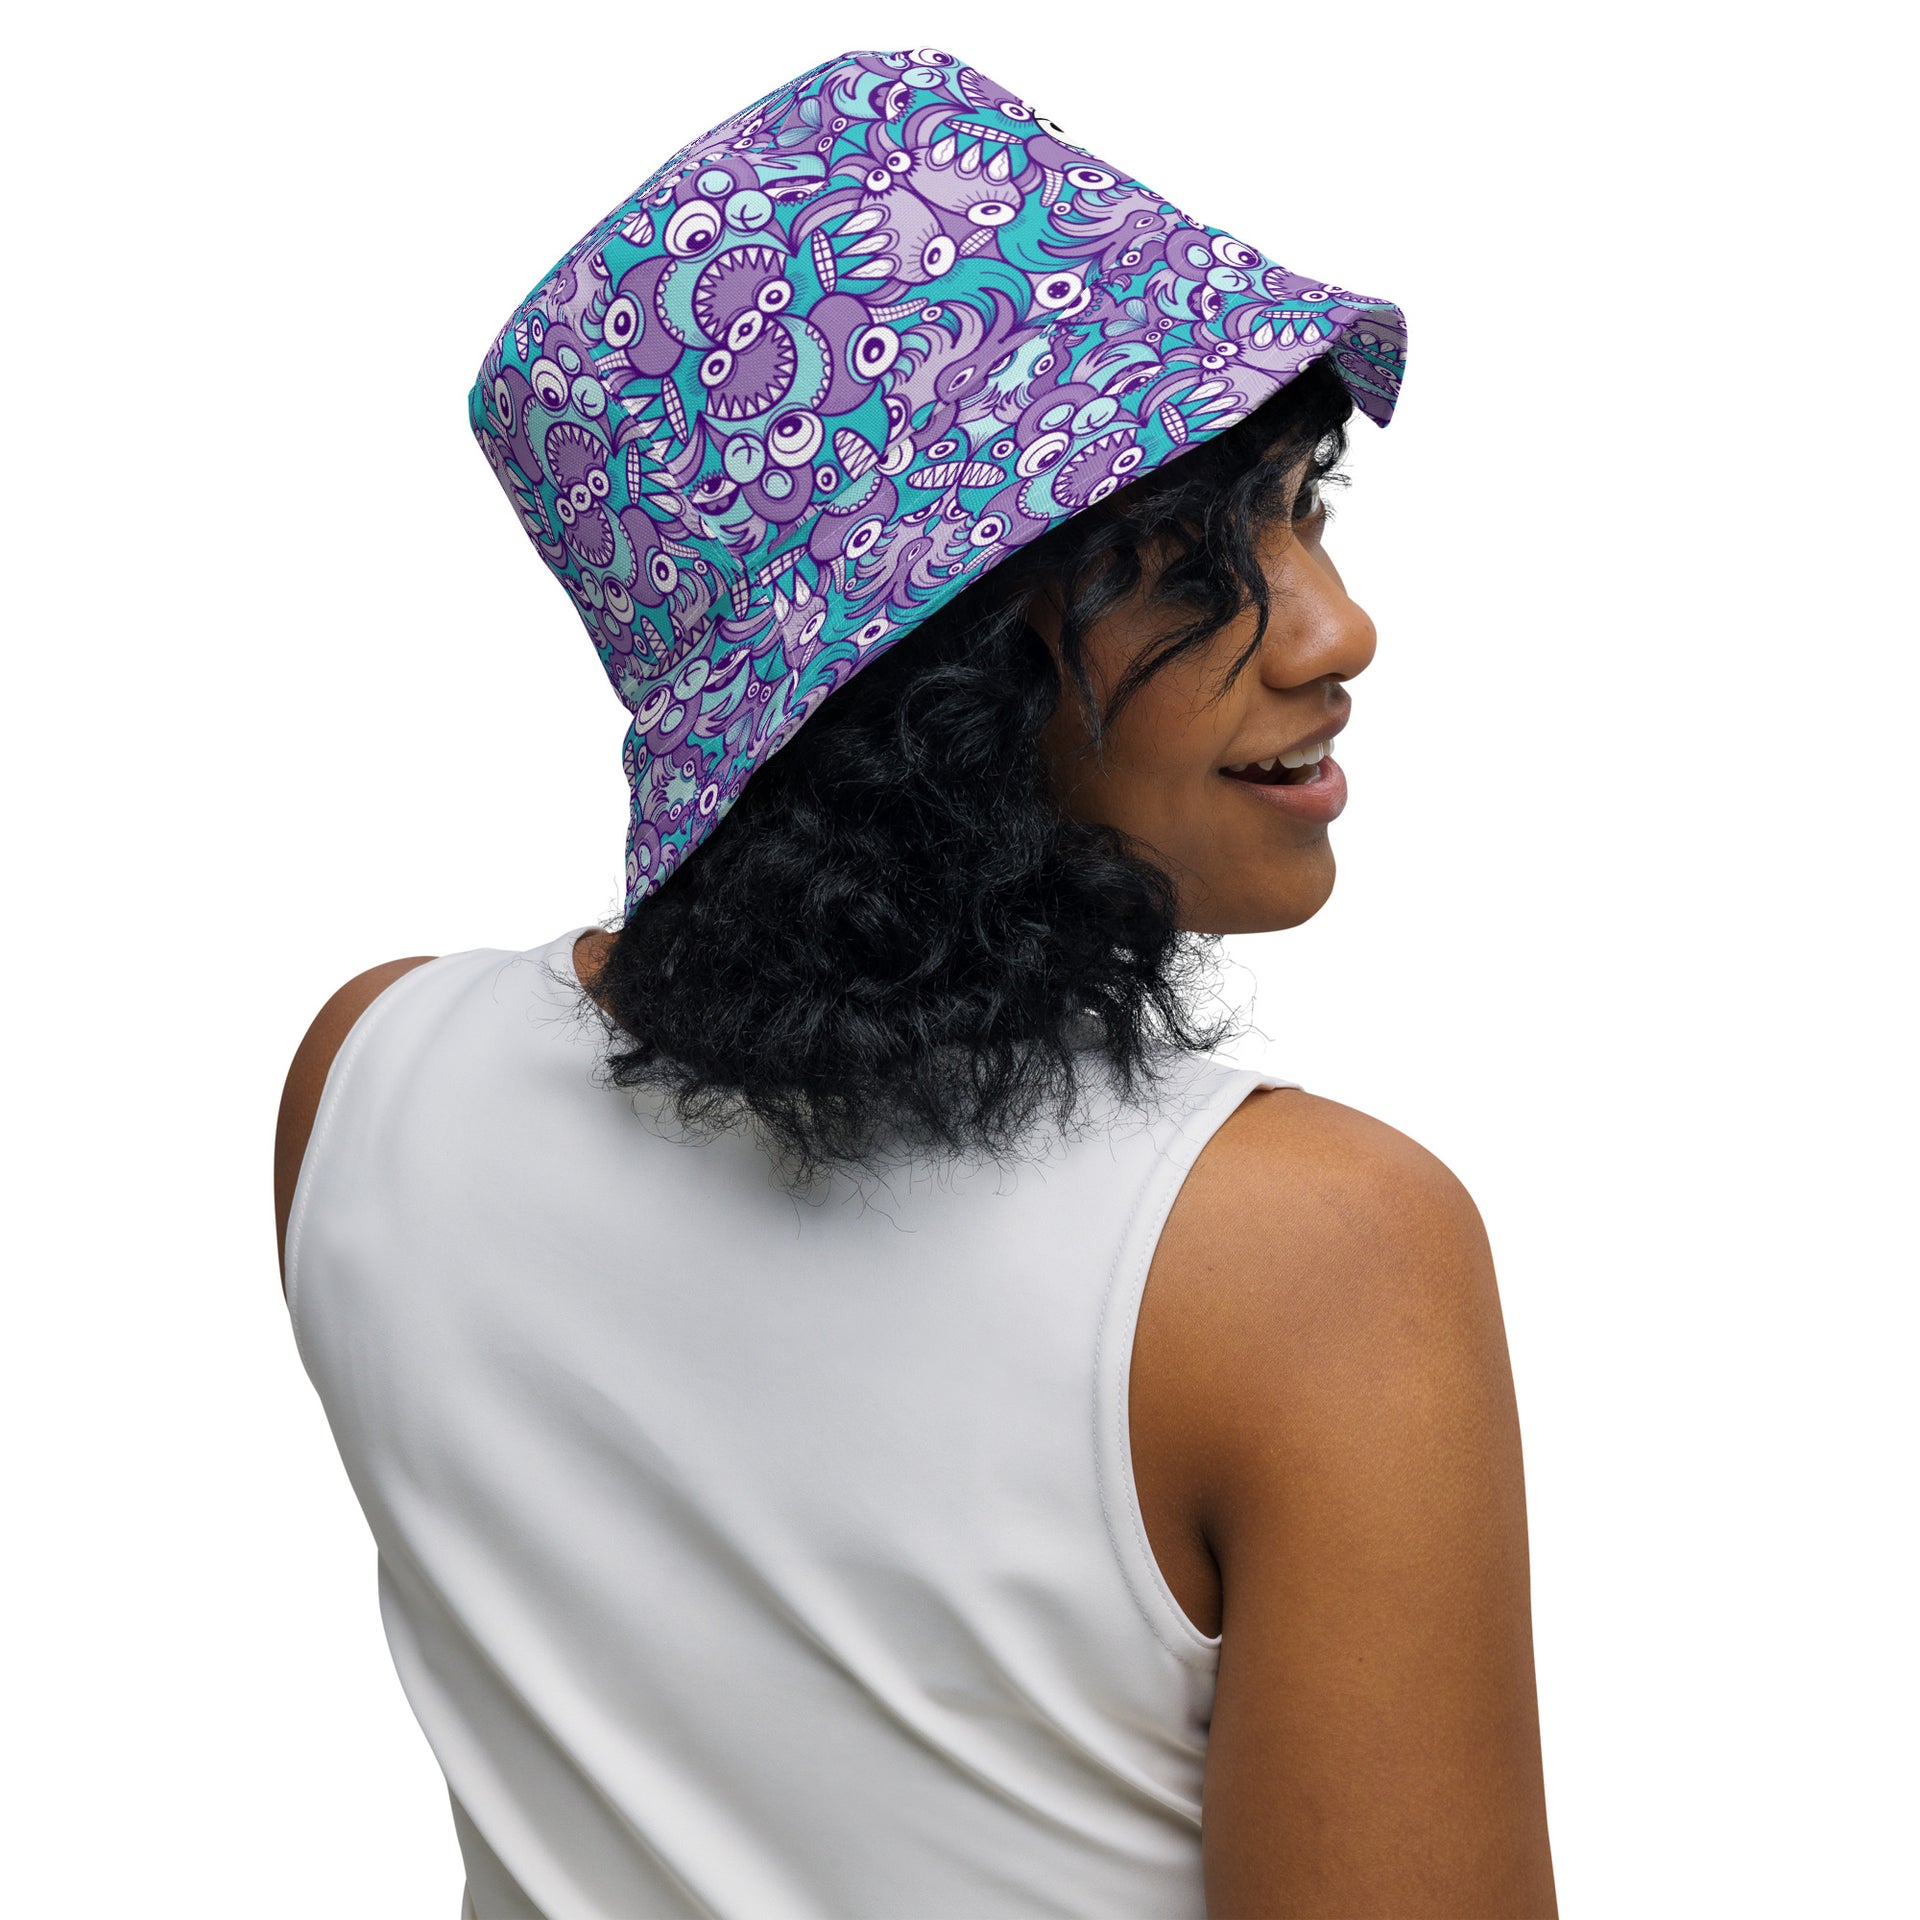 The powerful dark side of the doodle world Reversible bucket hat – Zoo&co